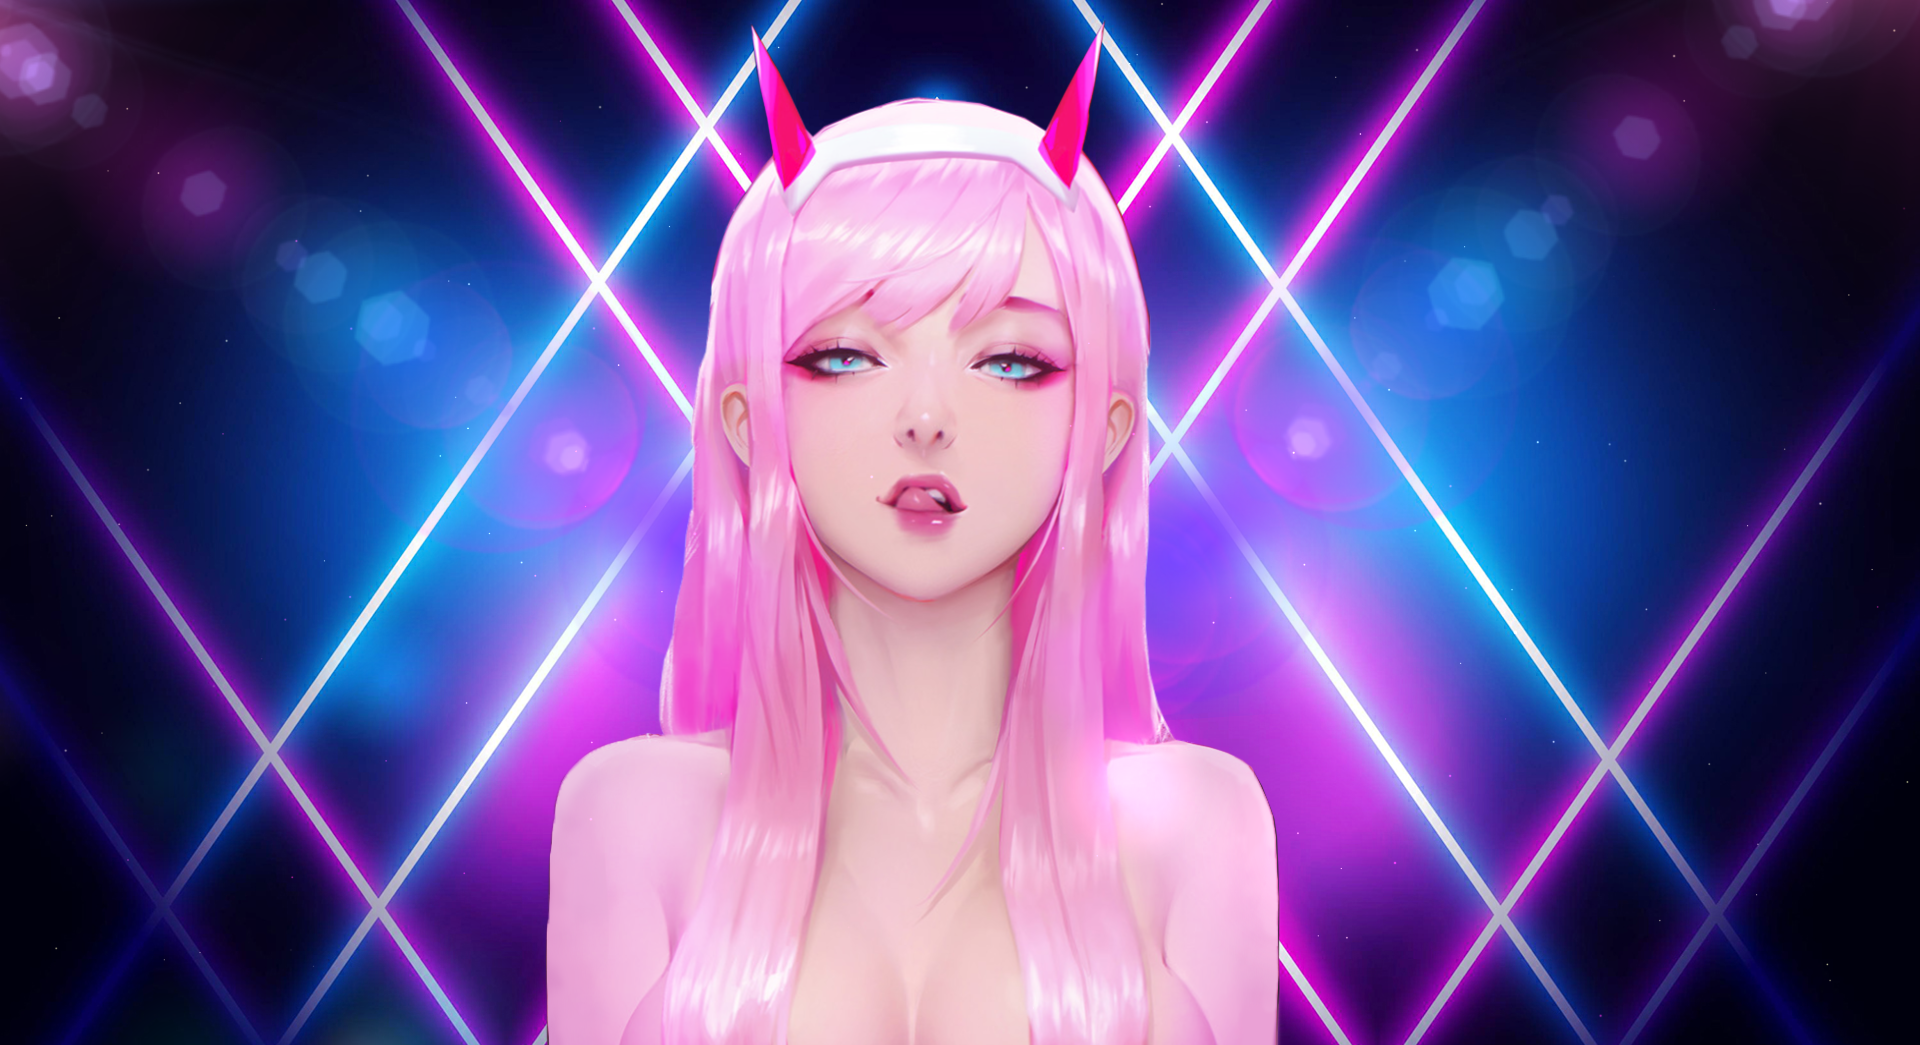 Zero Two Neon Darling in the Franxx live wallpaper [DOWNLOAD FREE]